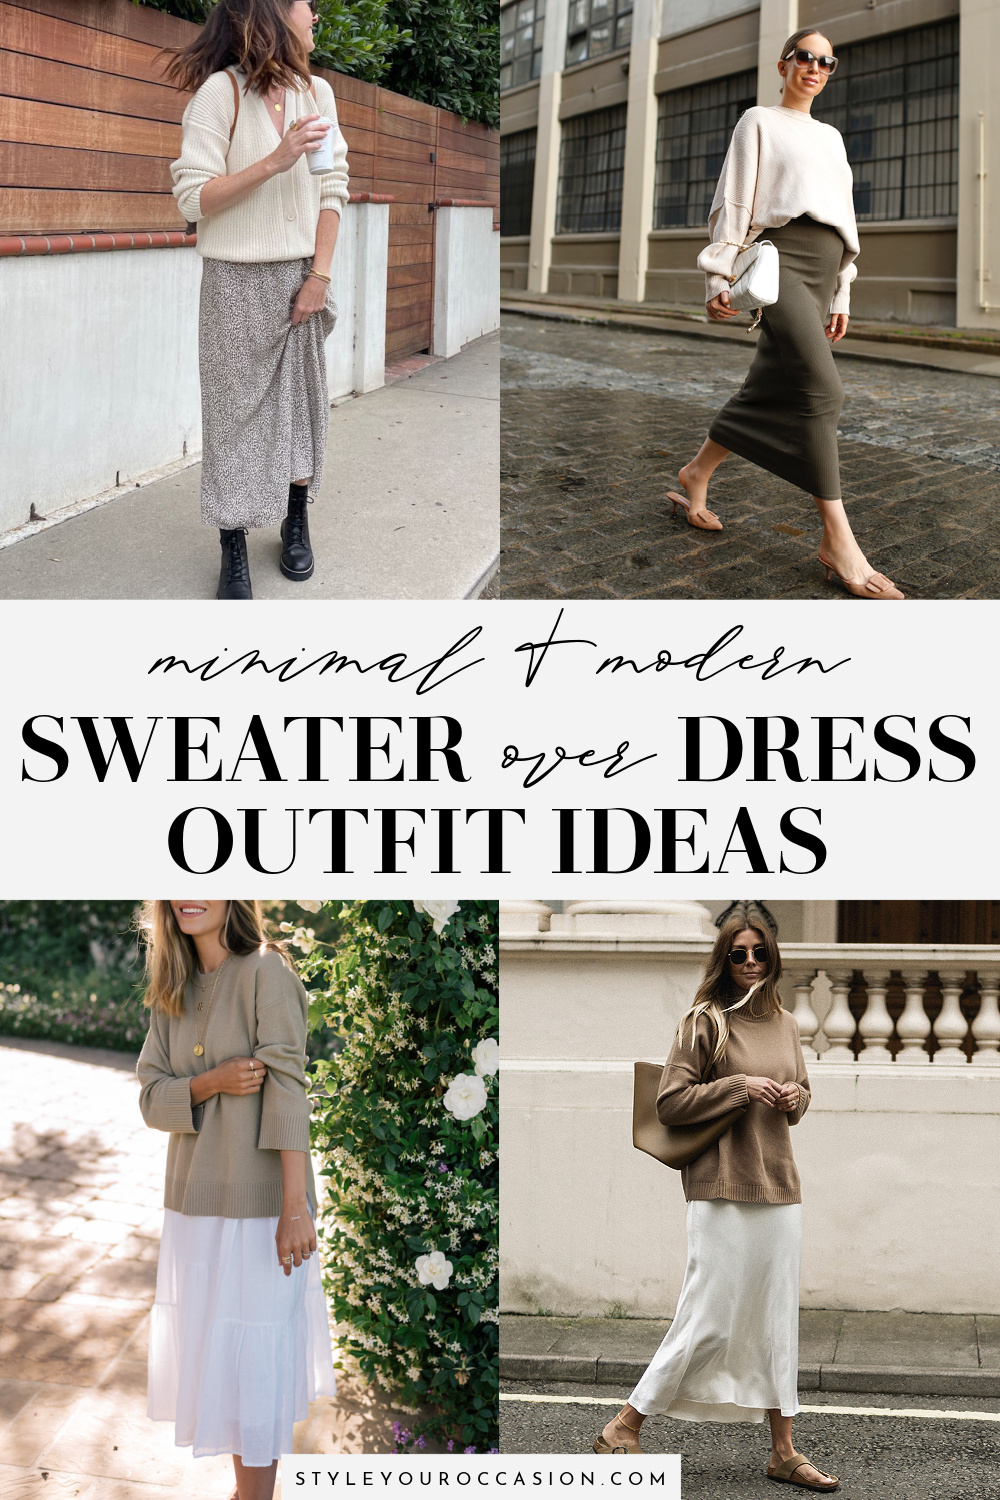 How To Wear A Sweater Over Dress: Chic Outfits + Tips To Own This Look!